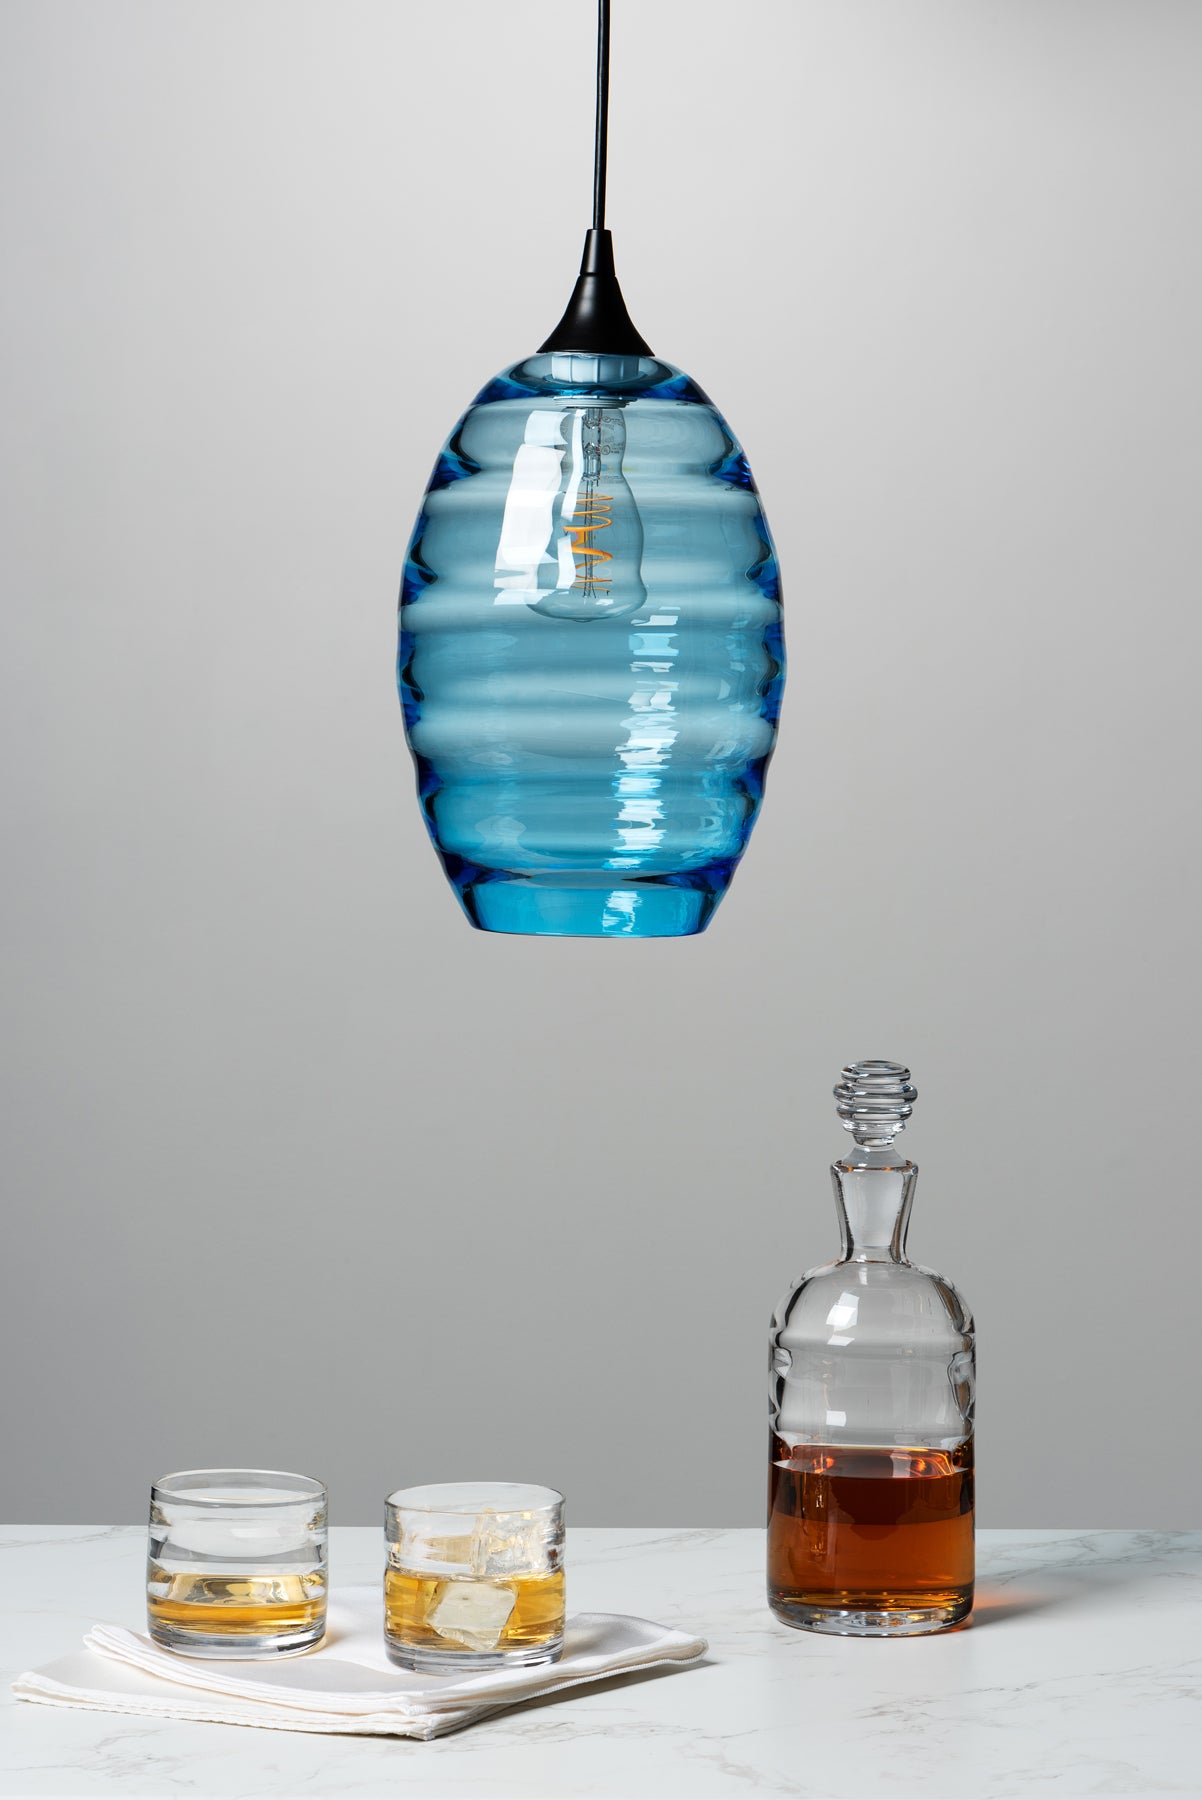 The Small Batch Glass Lighthouse series decanter, rocks glasses, and pendant light are in the frame - the decanter and glasses sit on the table and the light hands from above. Image by Loam